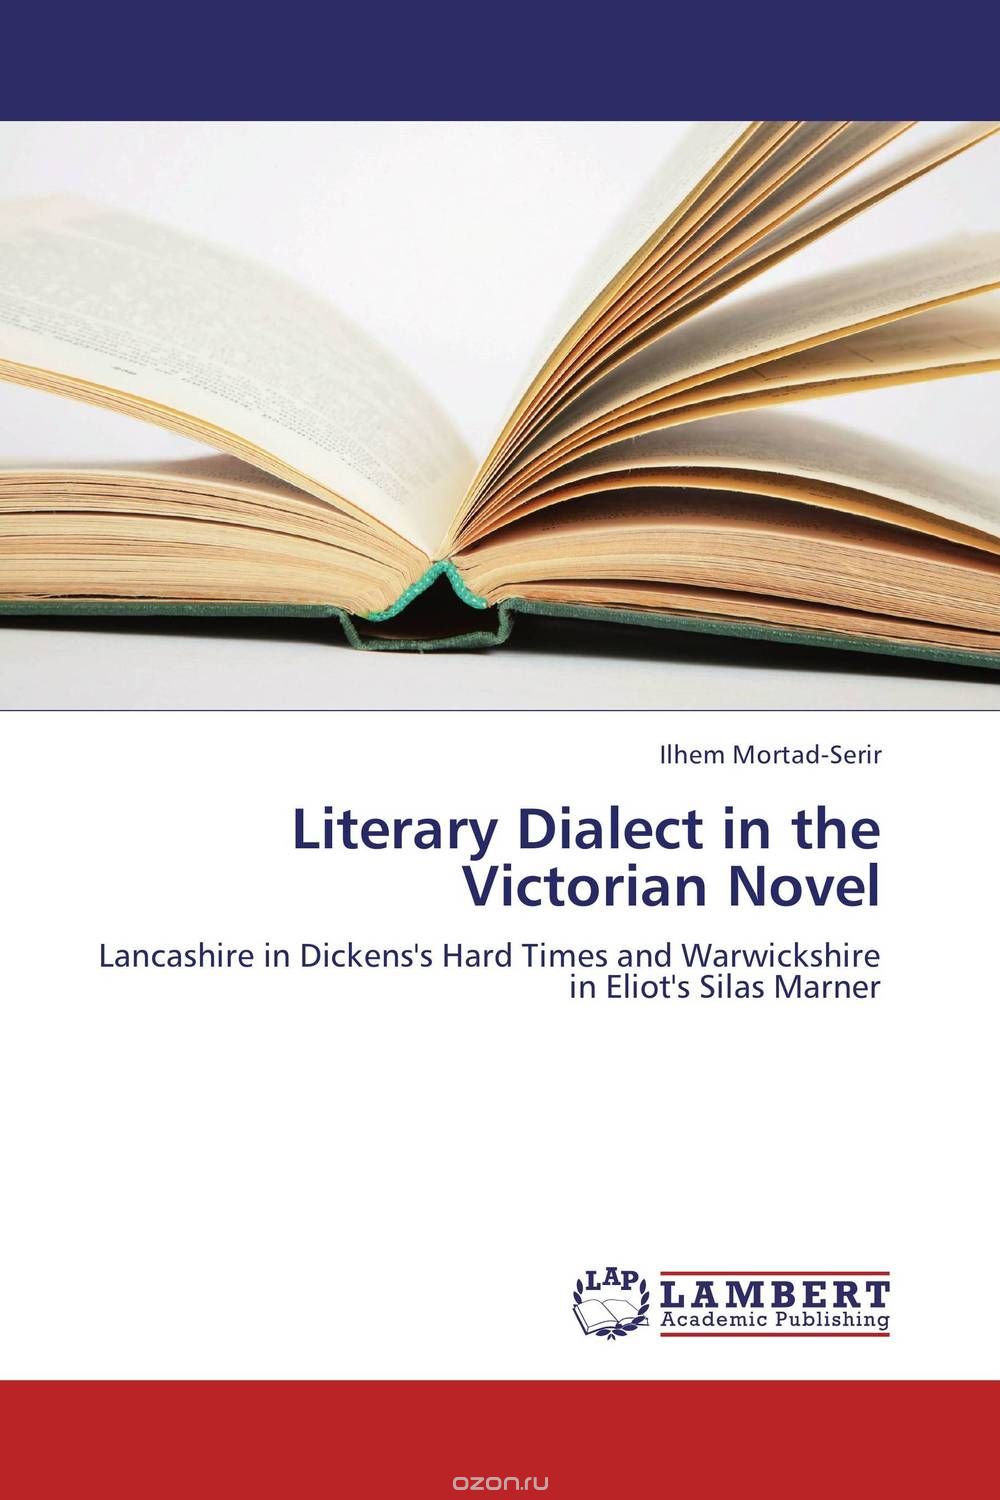 Literary Dialect in the Victorian Novel